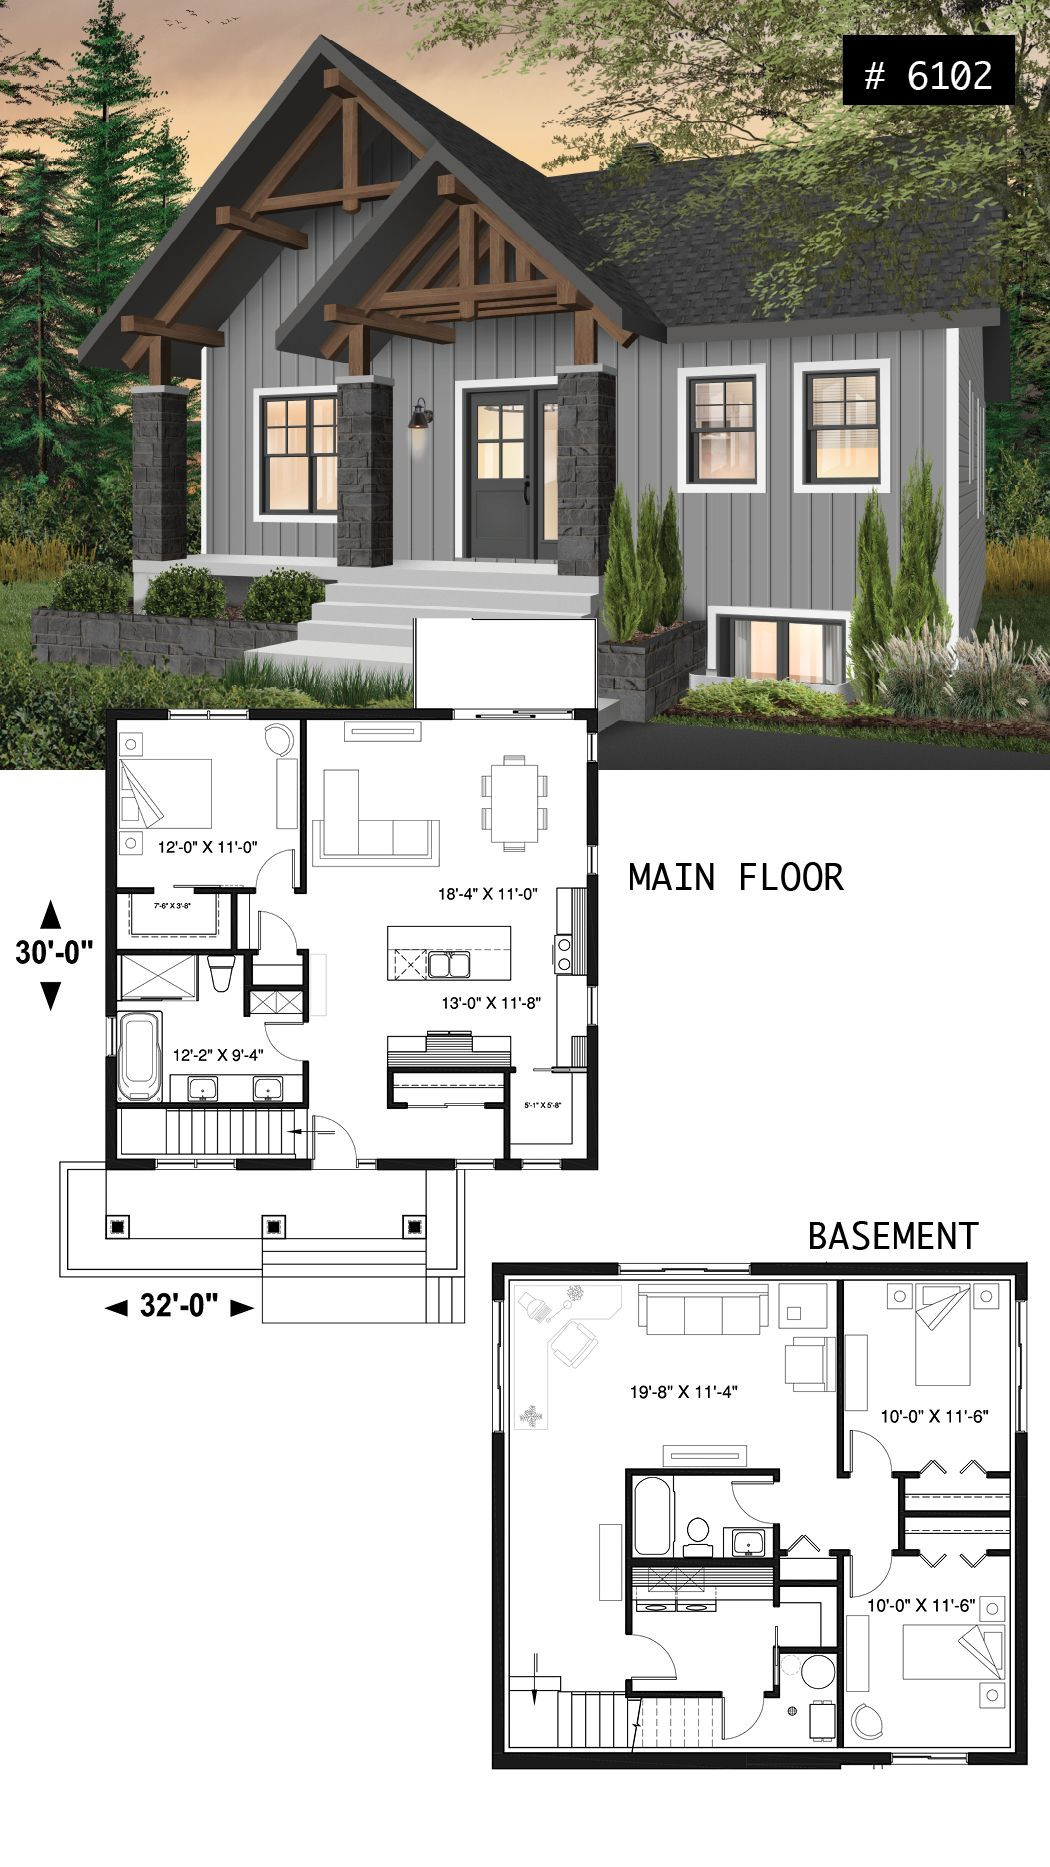 Small Three Bedroom House Plans
 Small and affordable bungalow house plan with master on